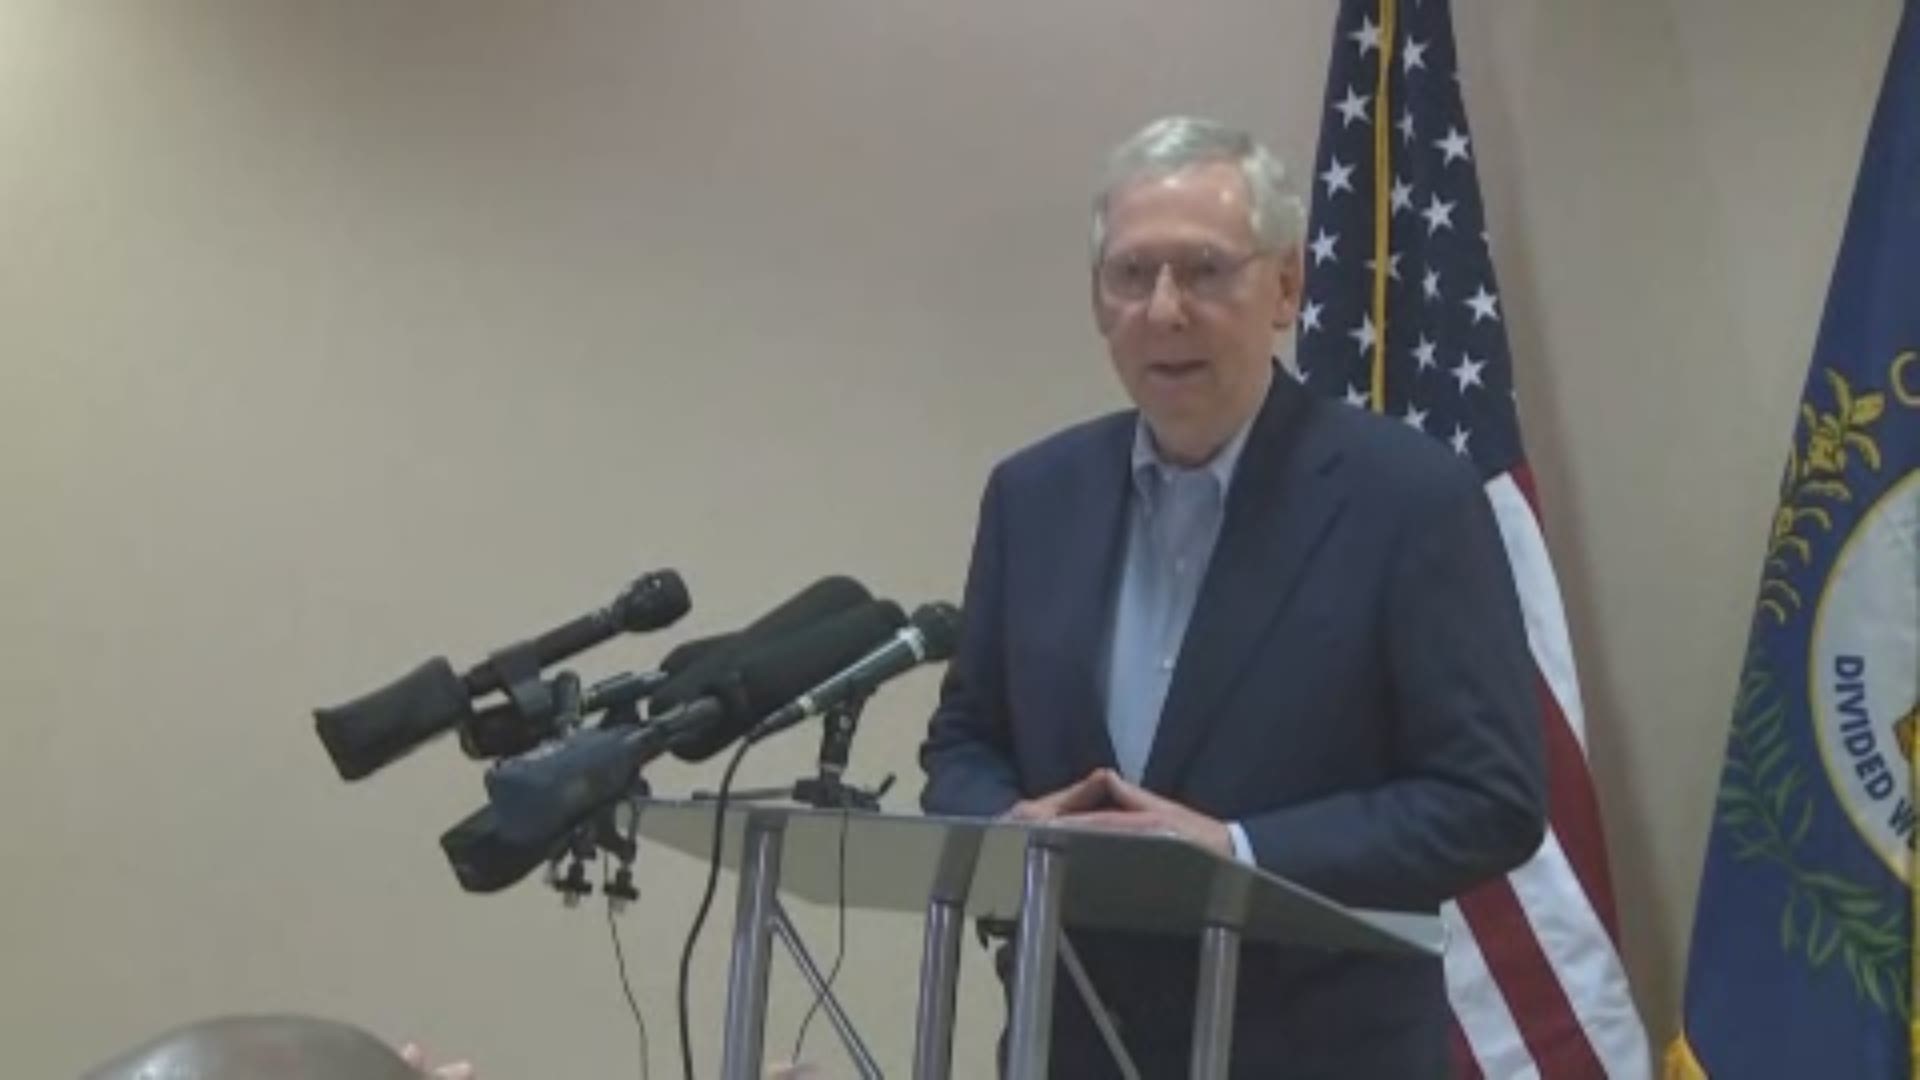 McConnell spoke with reporters in his home state of Kentucky on Monday, days after the Senate confirmed Kavanaugh despite allegations from Christine Blasey Ford that he sexually assaulted her when they were in high school in 1982.